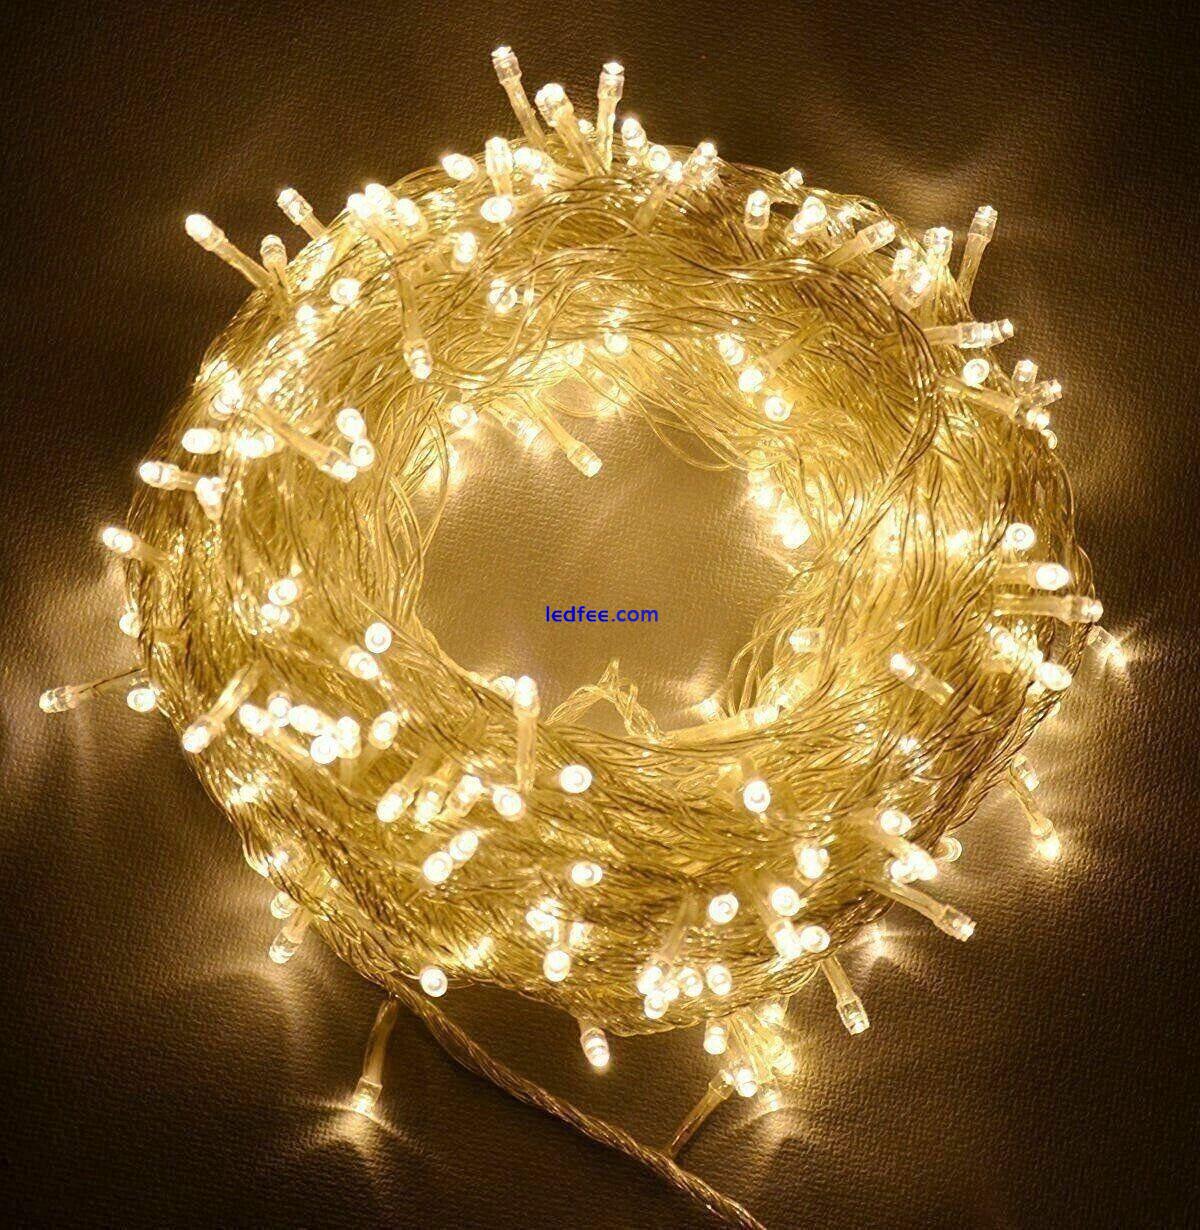 Fairy LED String Lights Battery Operated For Christmas Wedding Bedroom Tree Xmas 4 